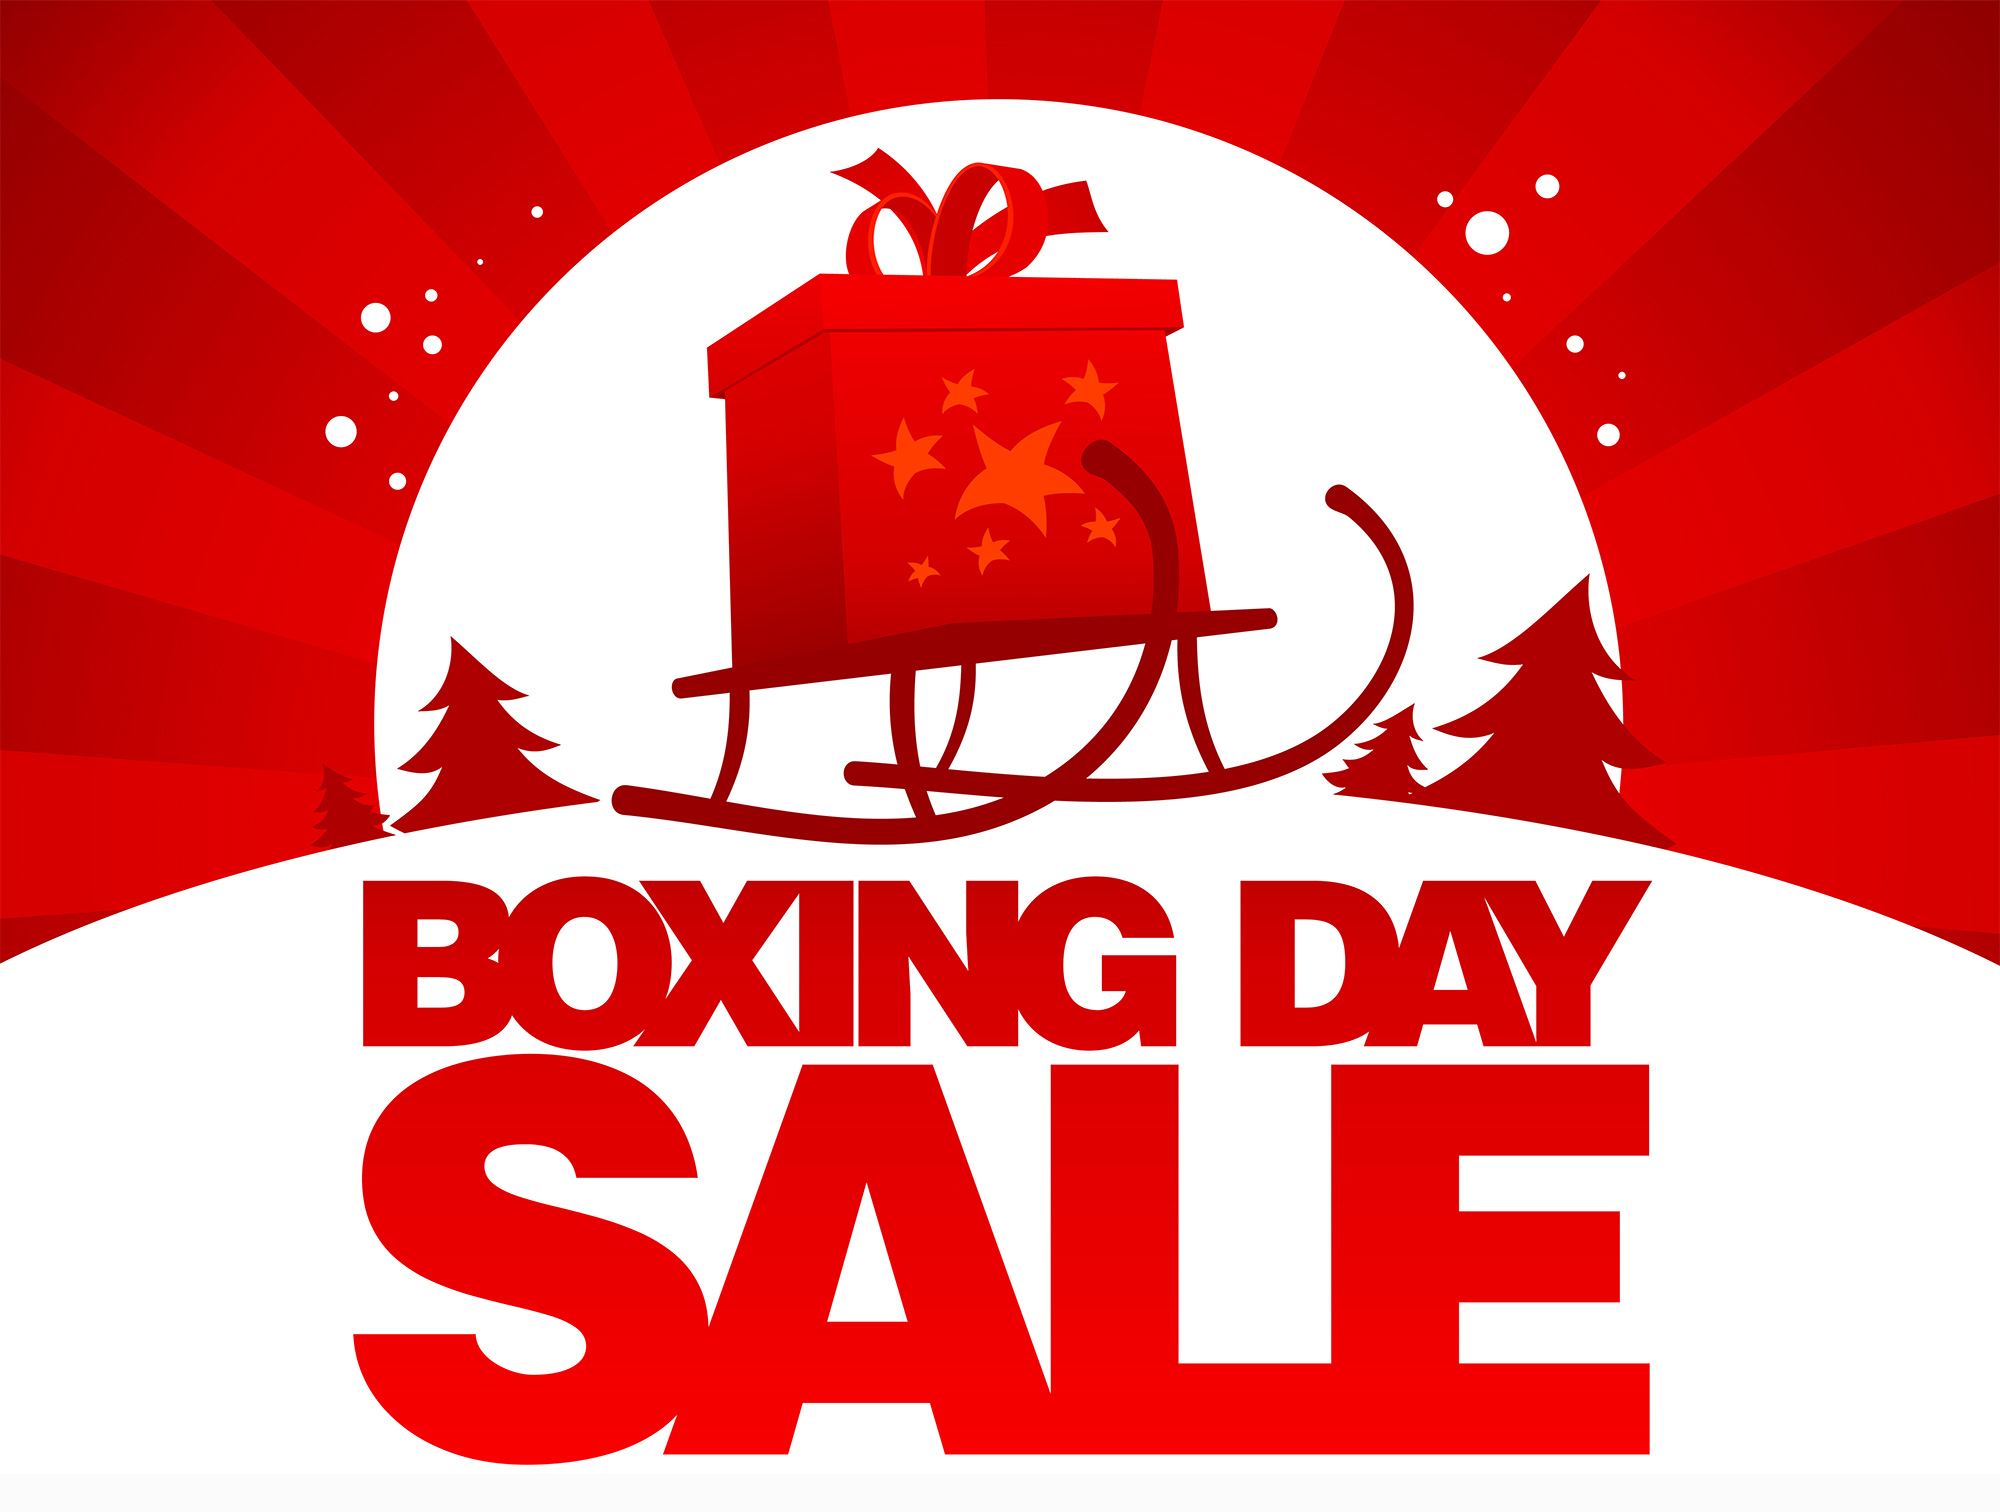 Boxing Day 2019 Sale! Dec 26, 2019 ONLY